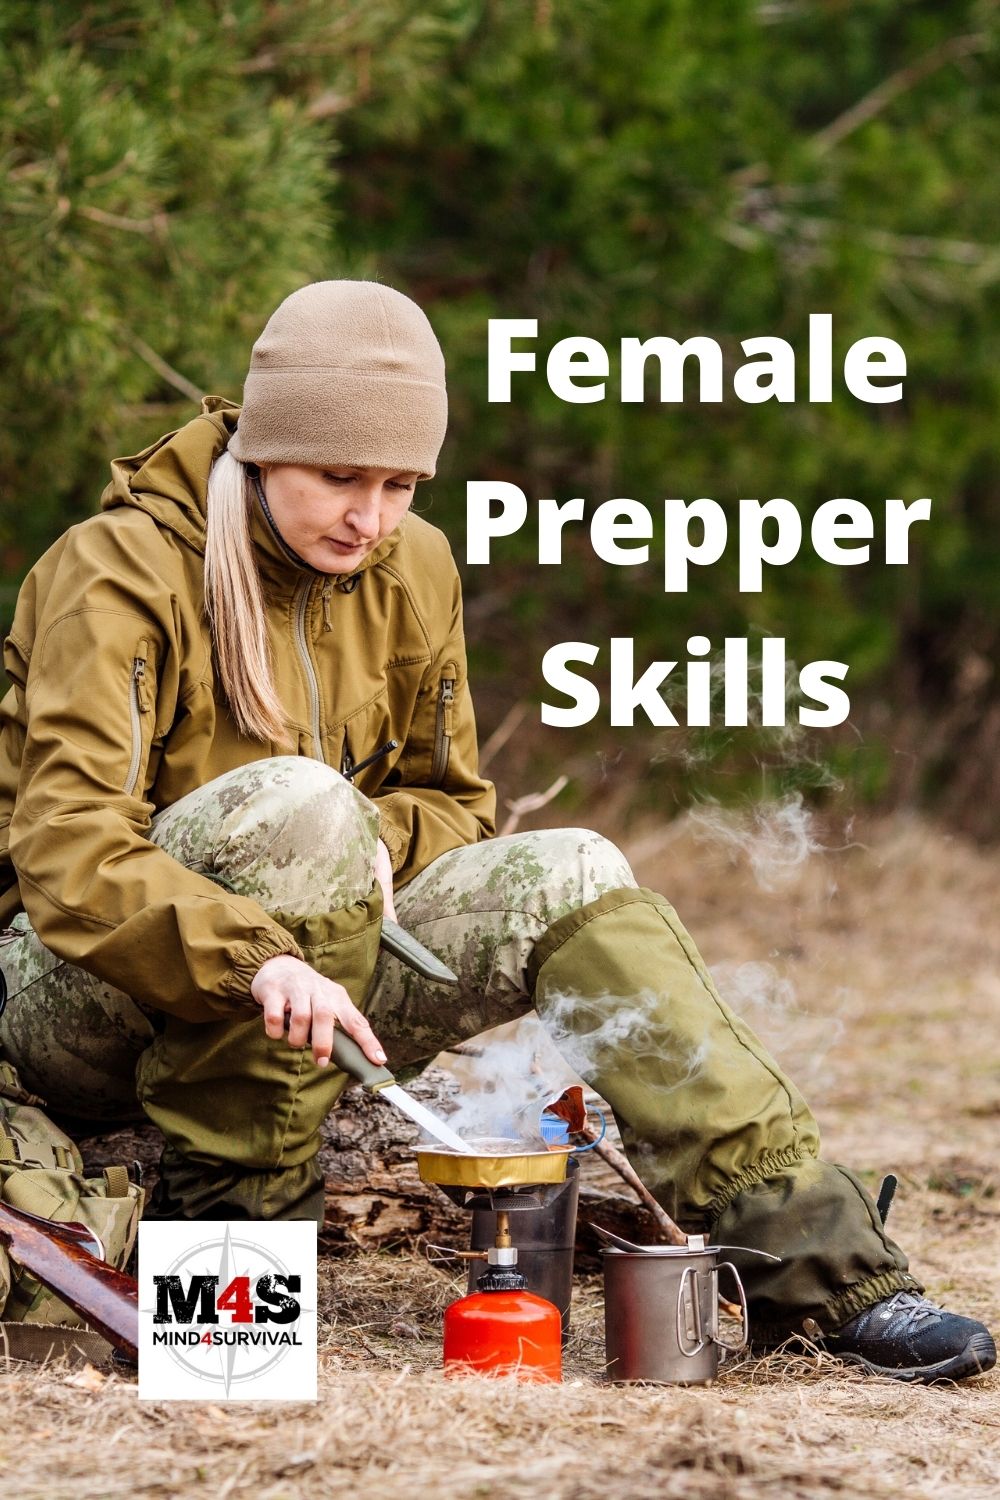 10 Skills Female Preppers Should Have That Aren\'t About Food